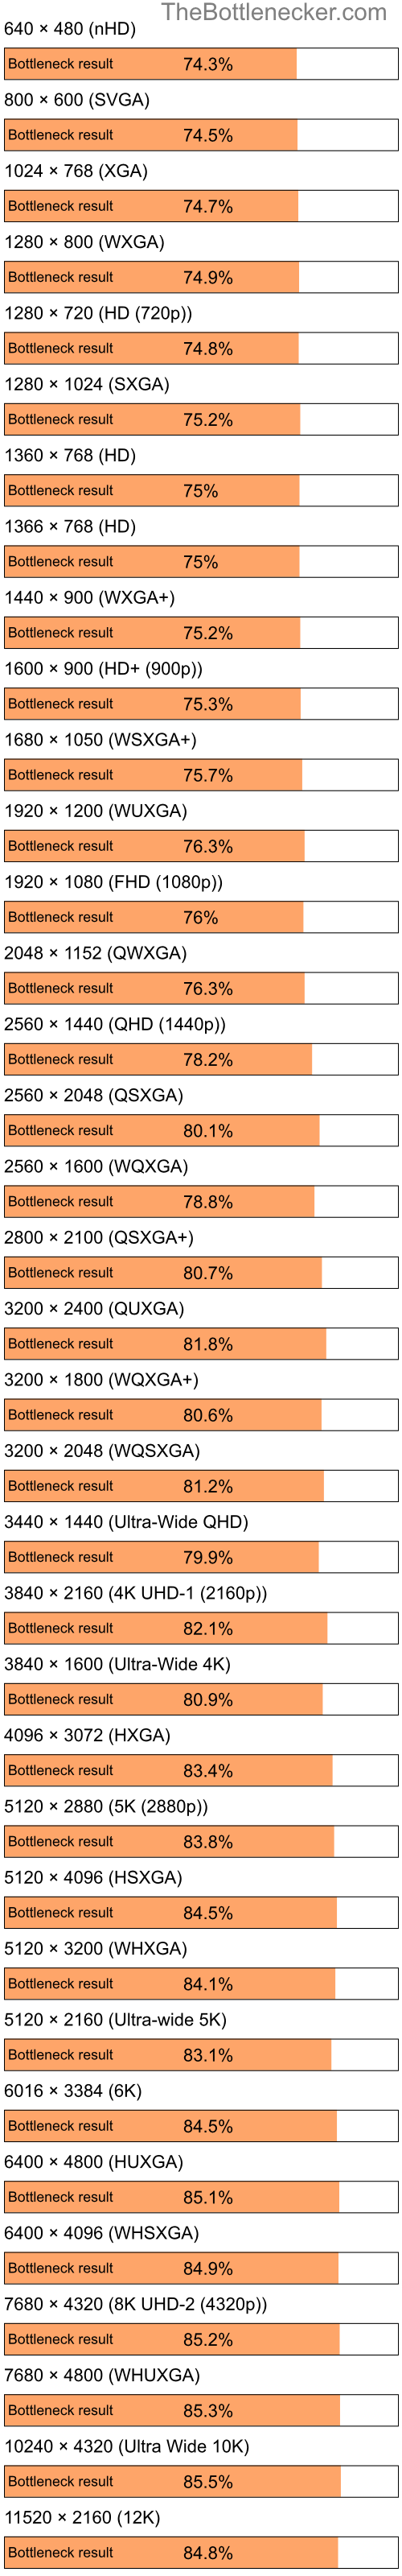 Bottleneck results by resolution for Intel Celeron M 410 and AMD Radeon 9600 Family in Processor Intense Tasks